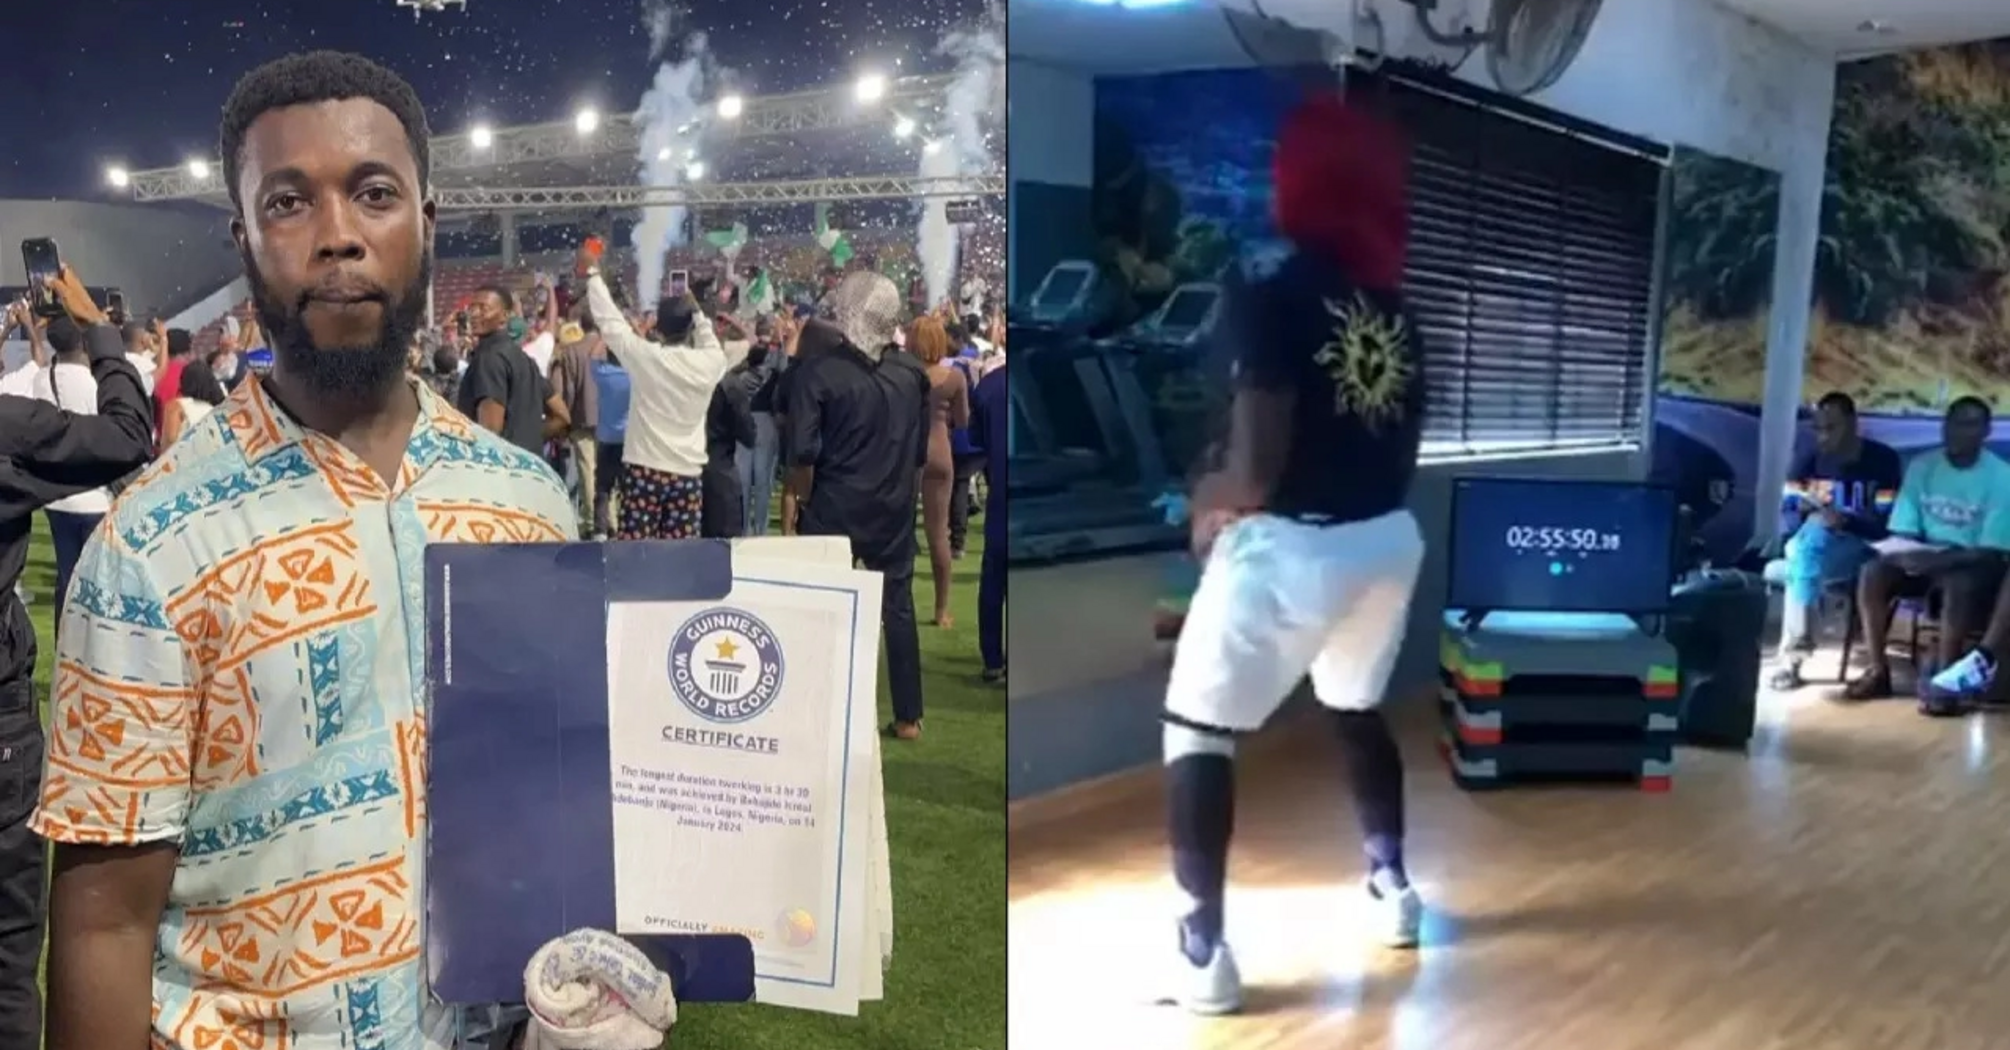 Babajide Israel Adebanjo has made headlines by breaking the Guinness World Record